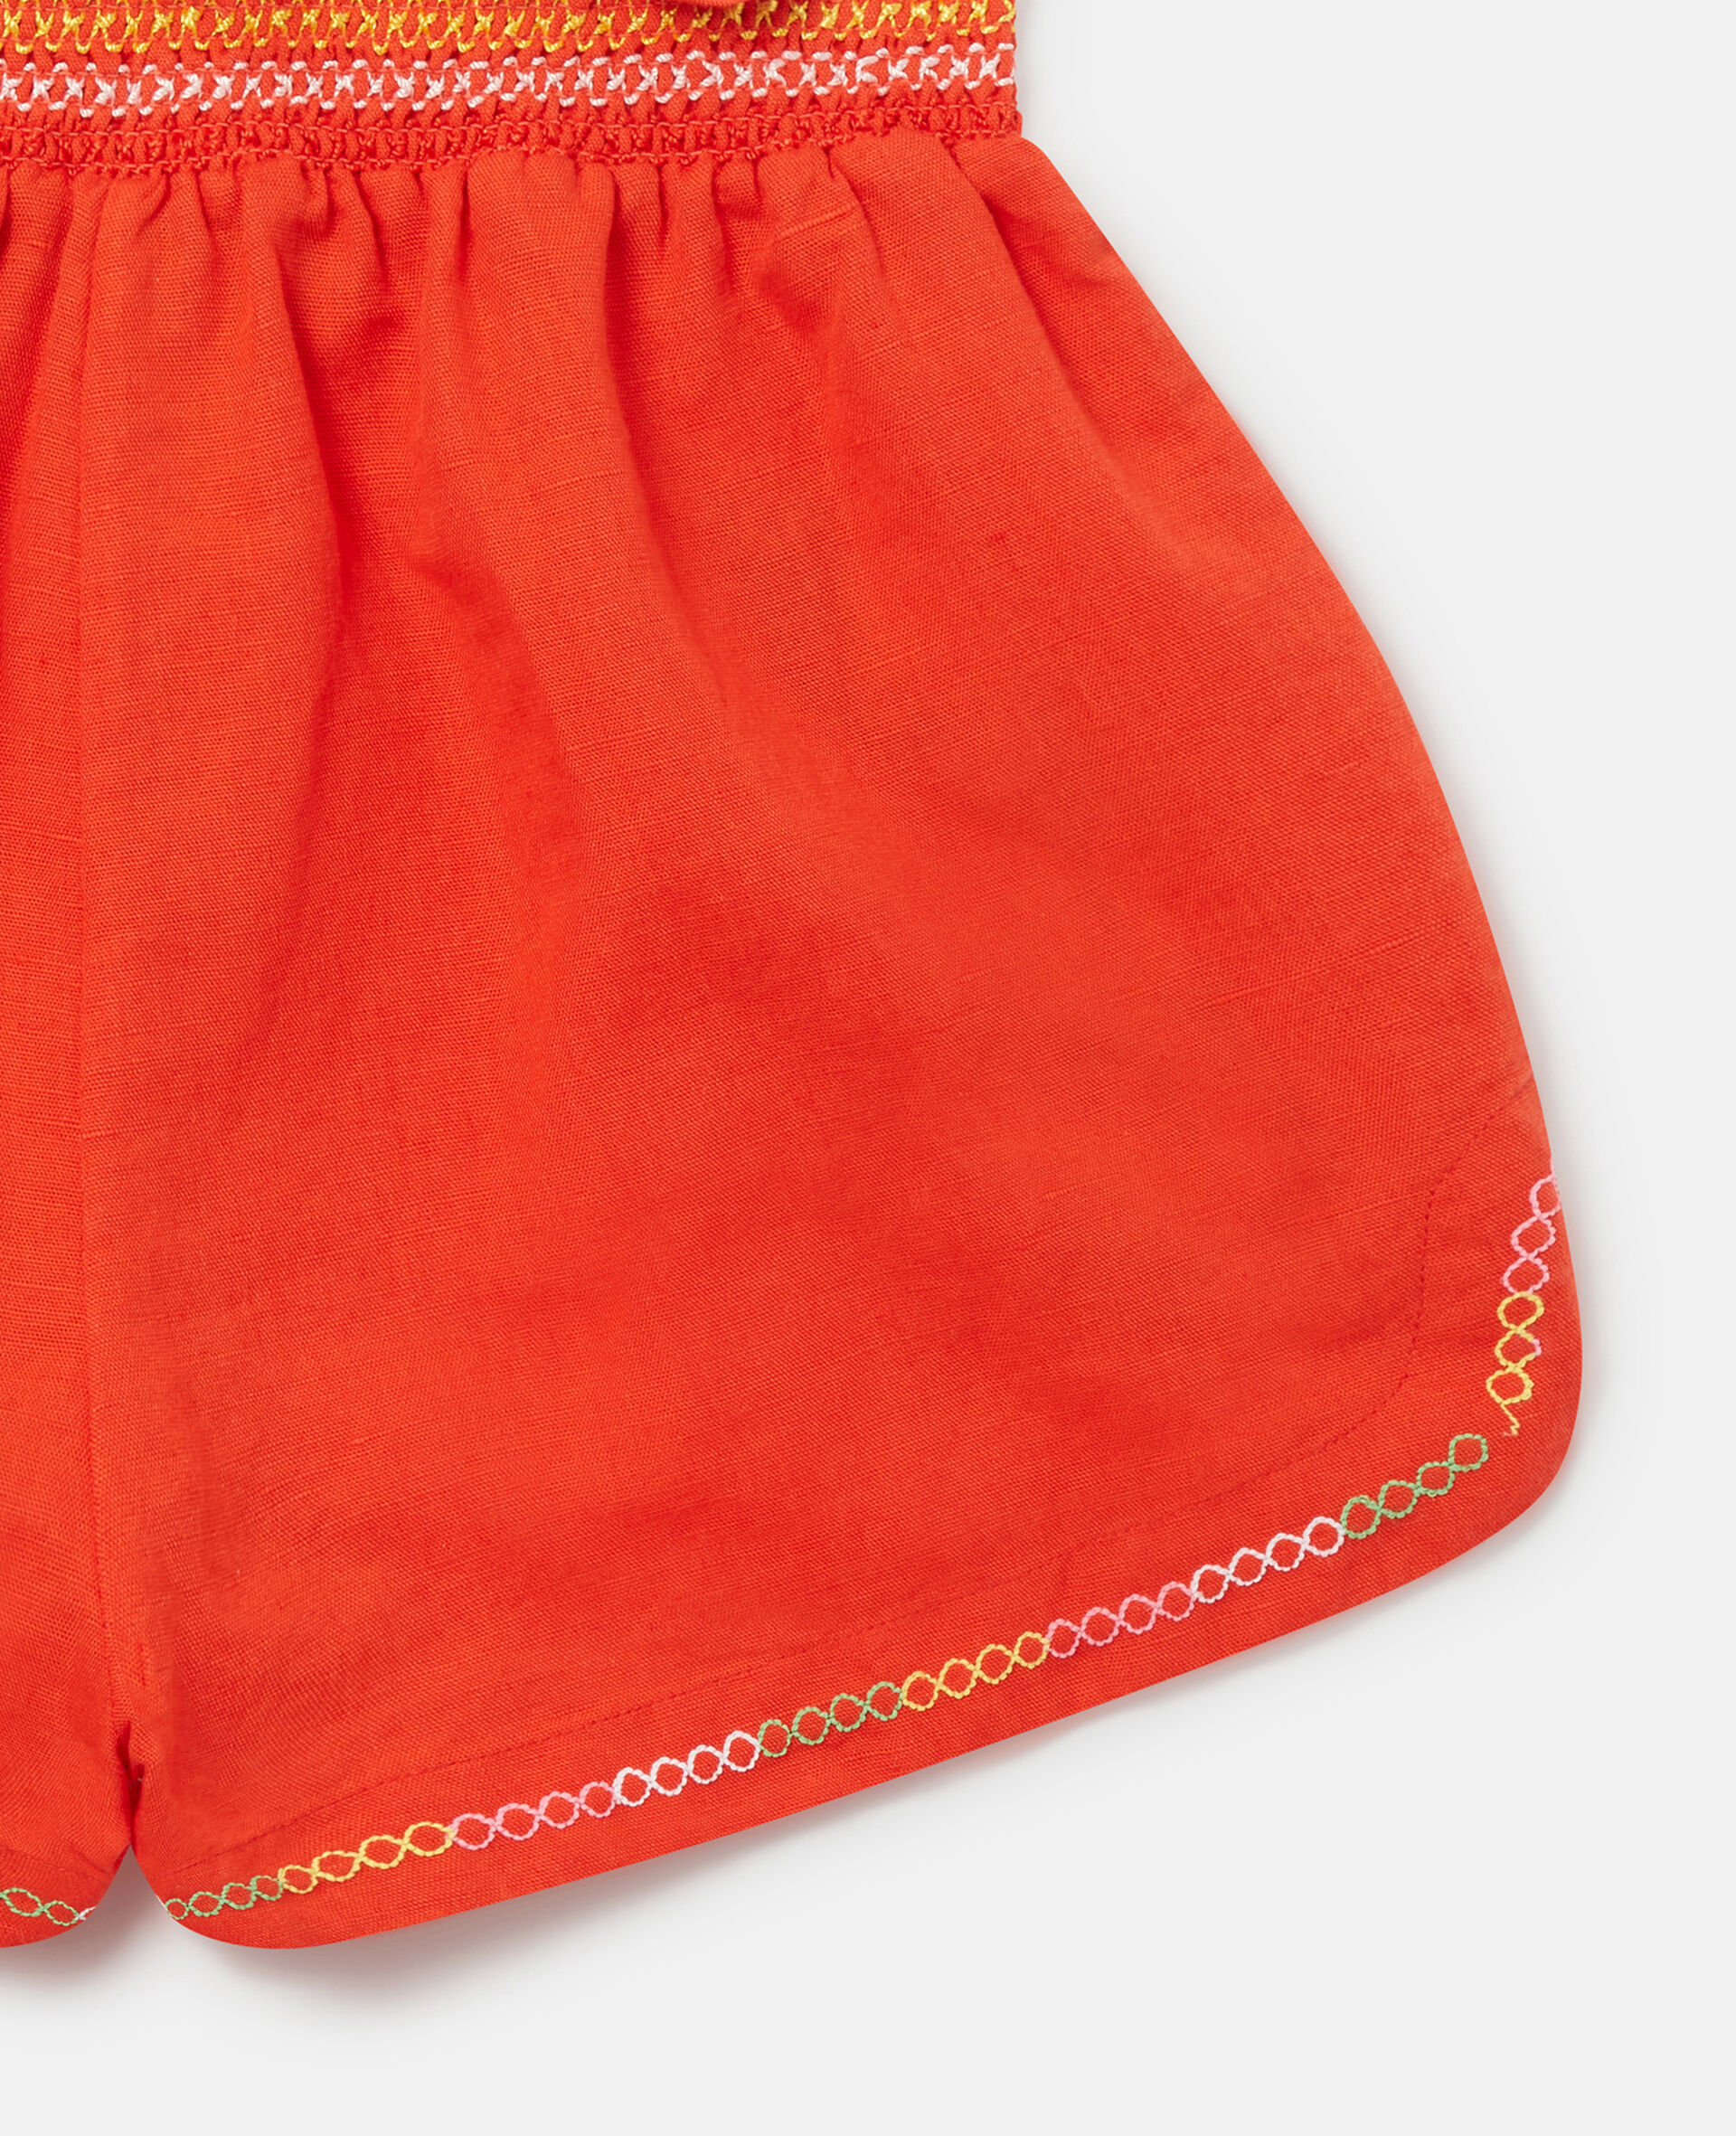 Parrot Embroidery Linen Shorts-Red-large image number 3